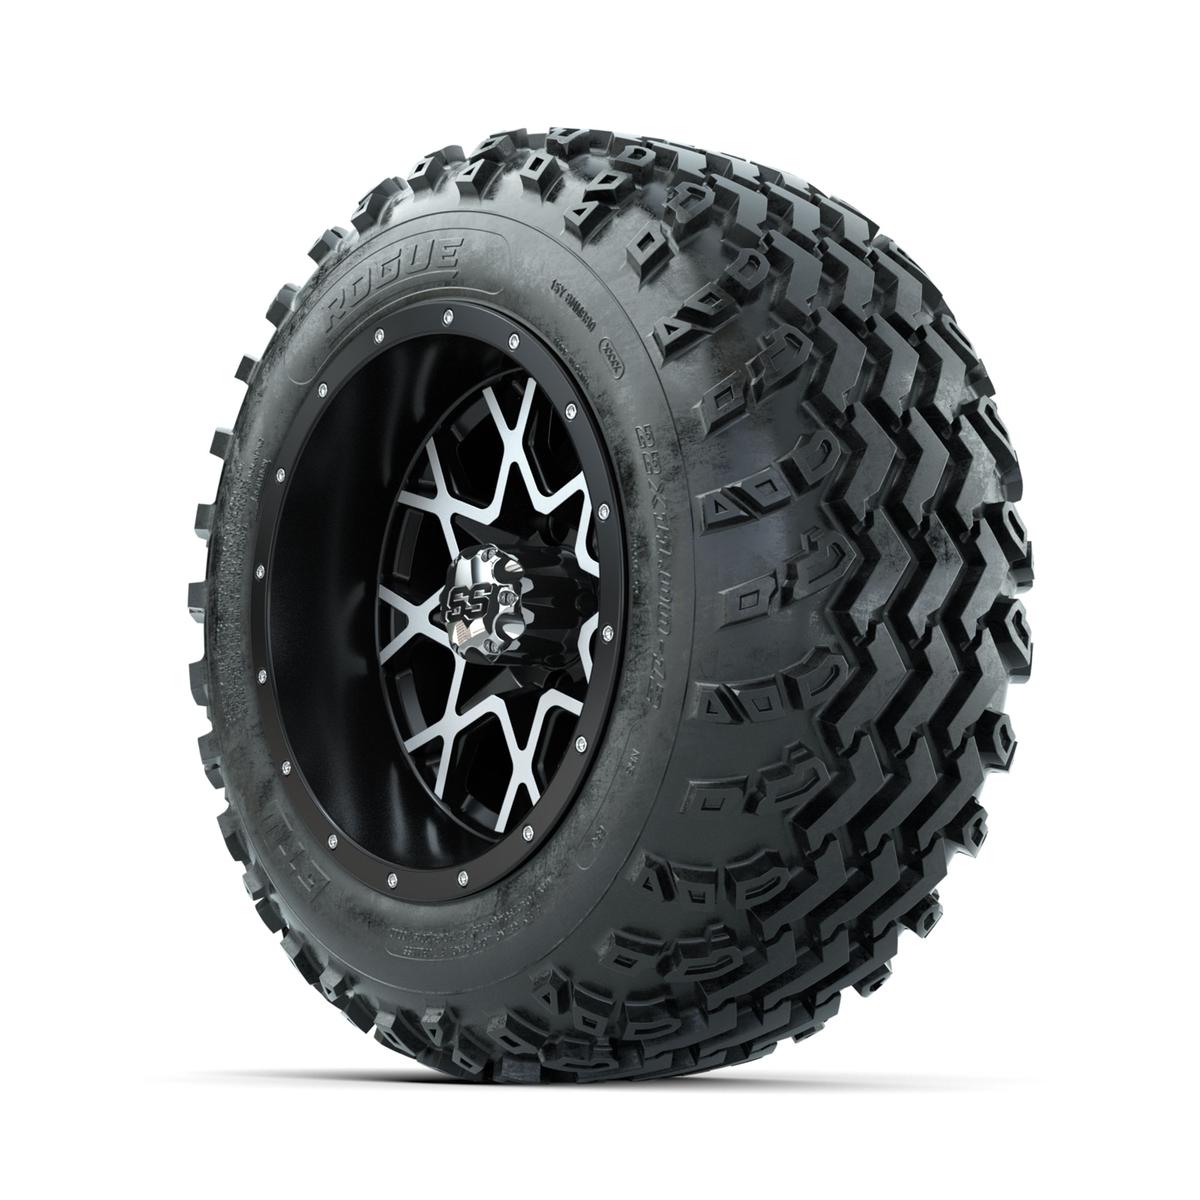 GTW Vortex Machined/Matte Black 12 in Wheels with 22x11.00-12 Rogue All Terrain Tires – Full Set